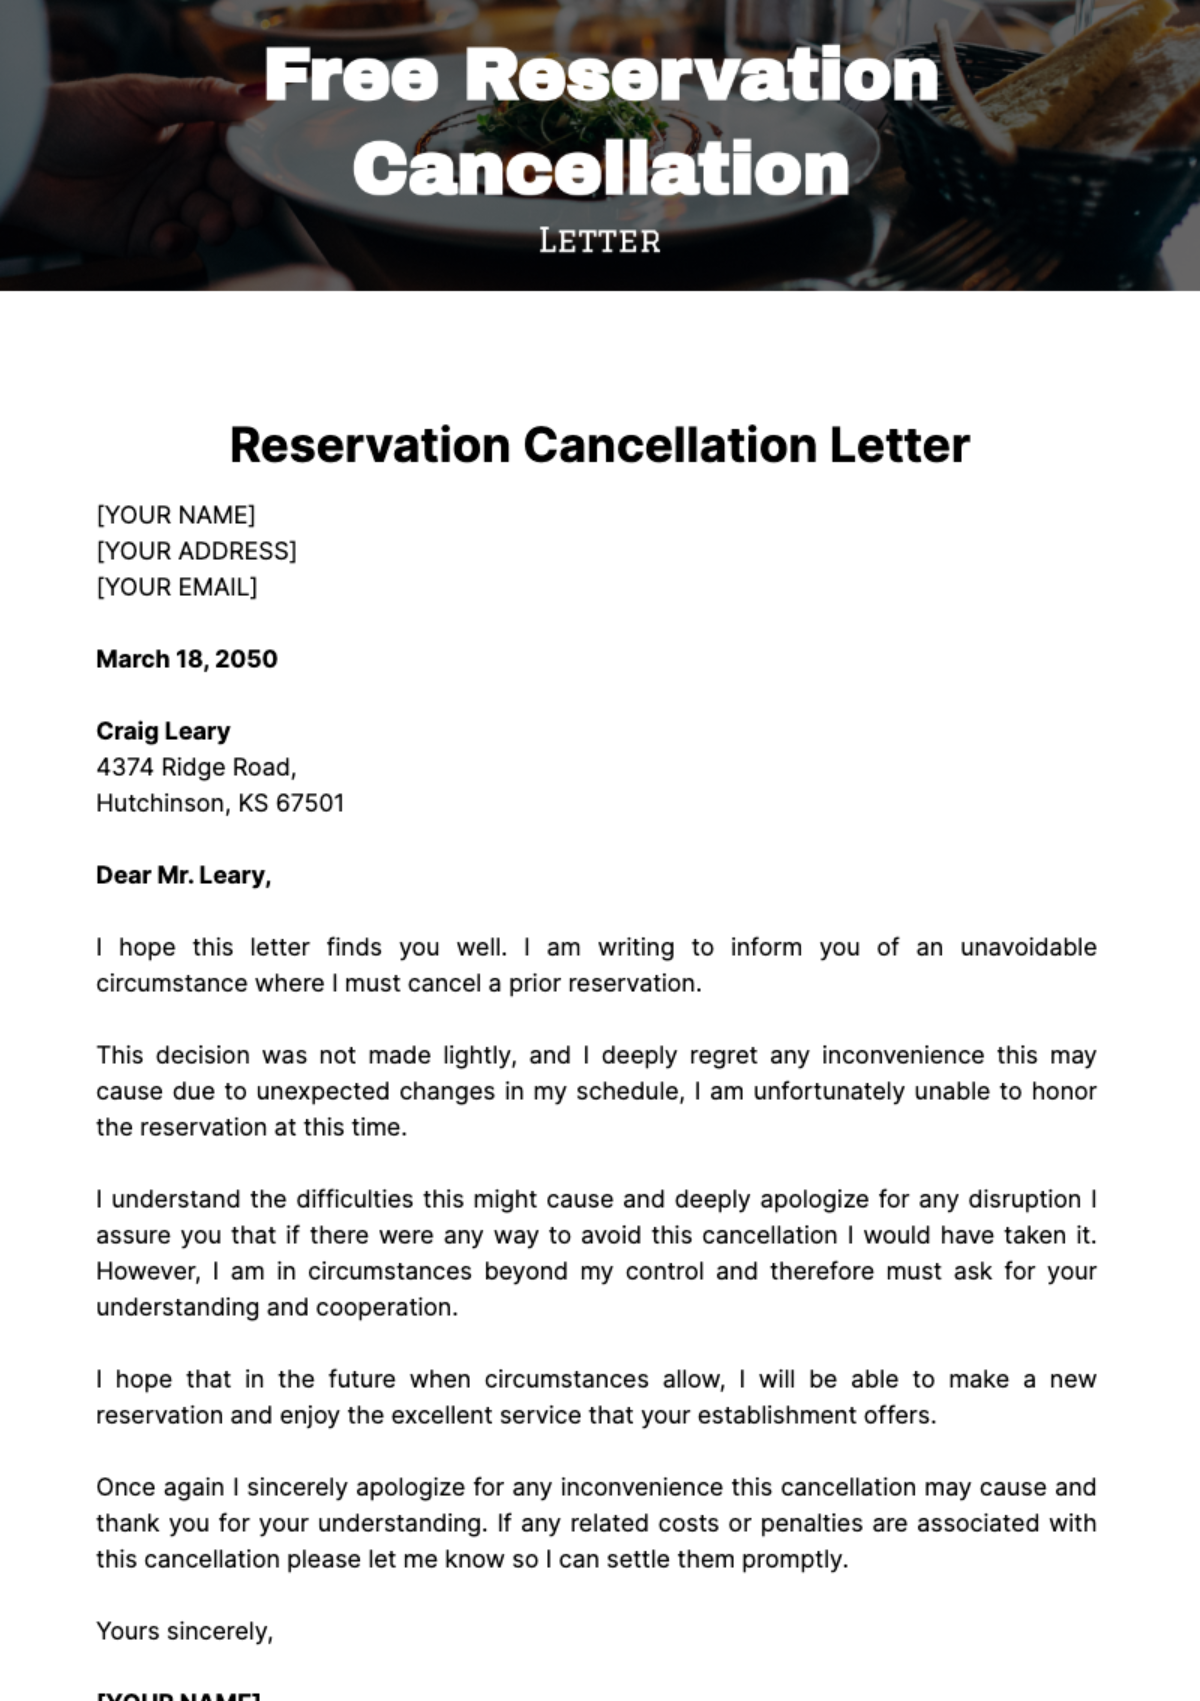 Free Reservation Cancellation Letter Template